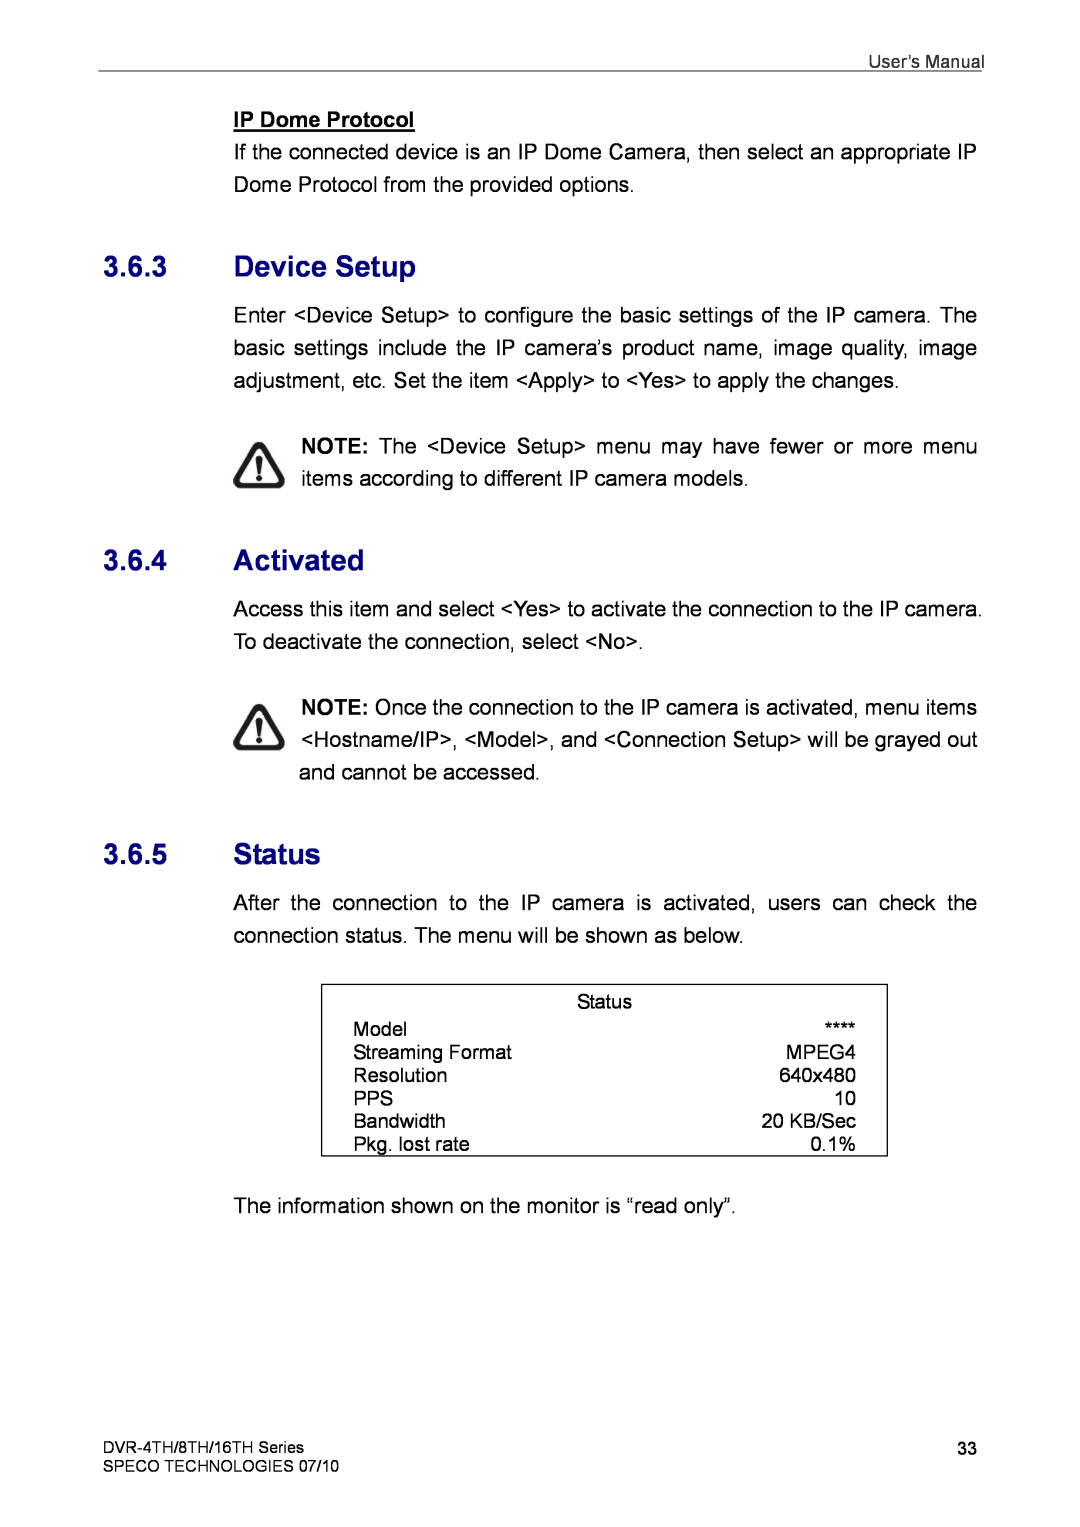 Speco Technologies 4TH, 8TH, 16TH user manual Device Setup, Activated, Status, IP Dome Protocol 